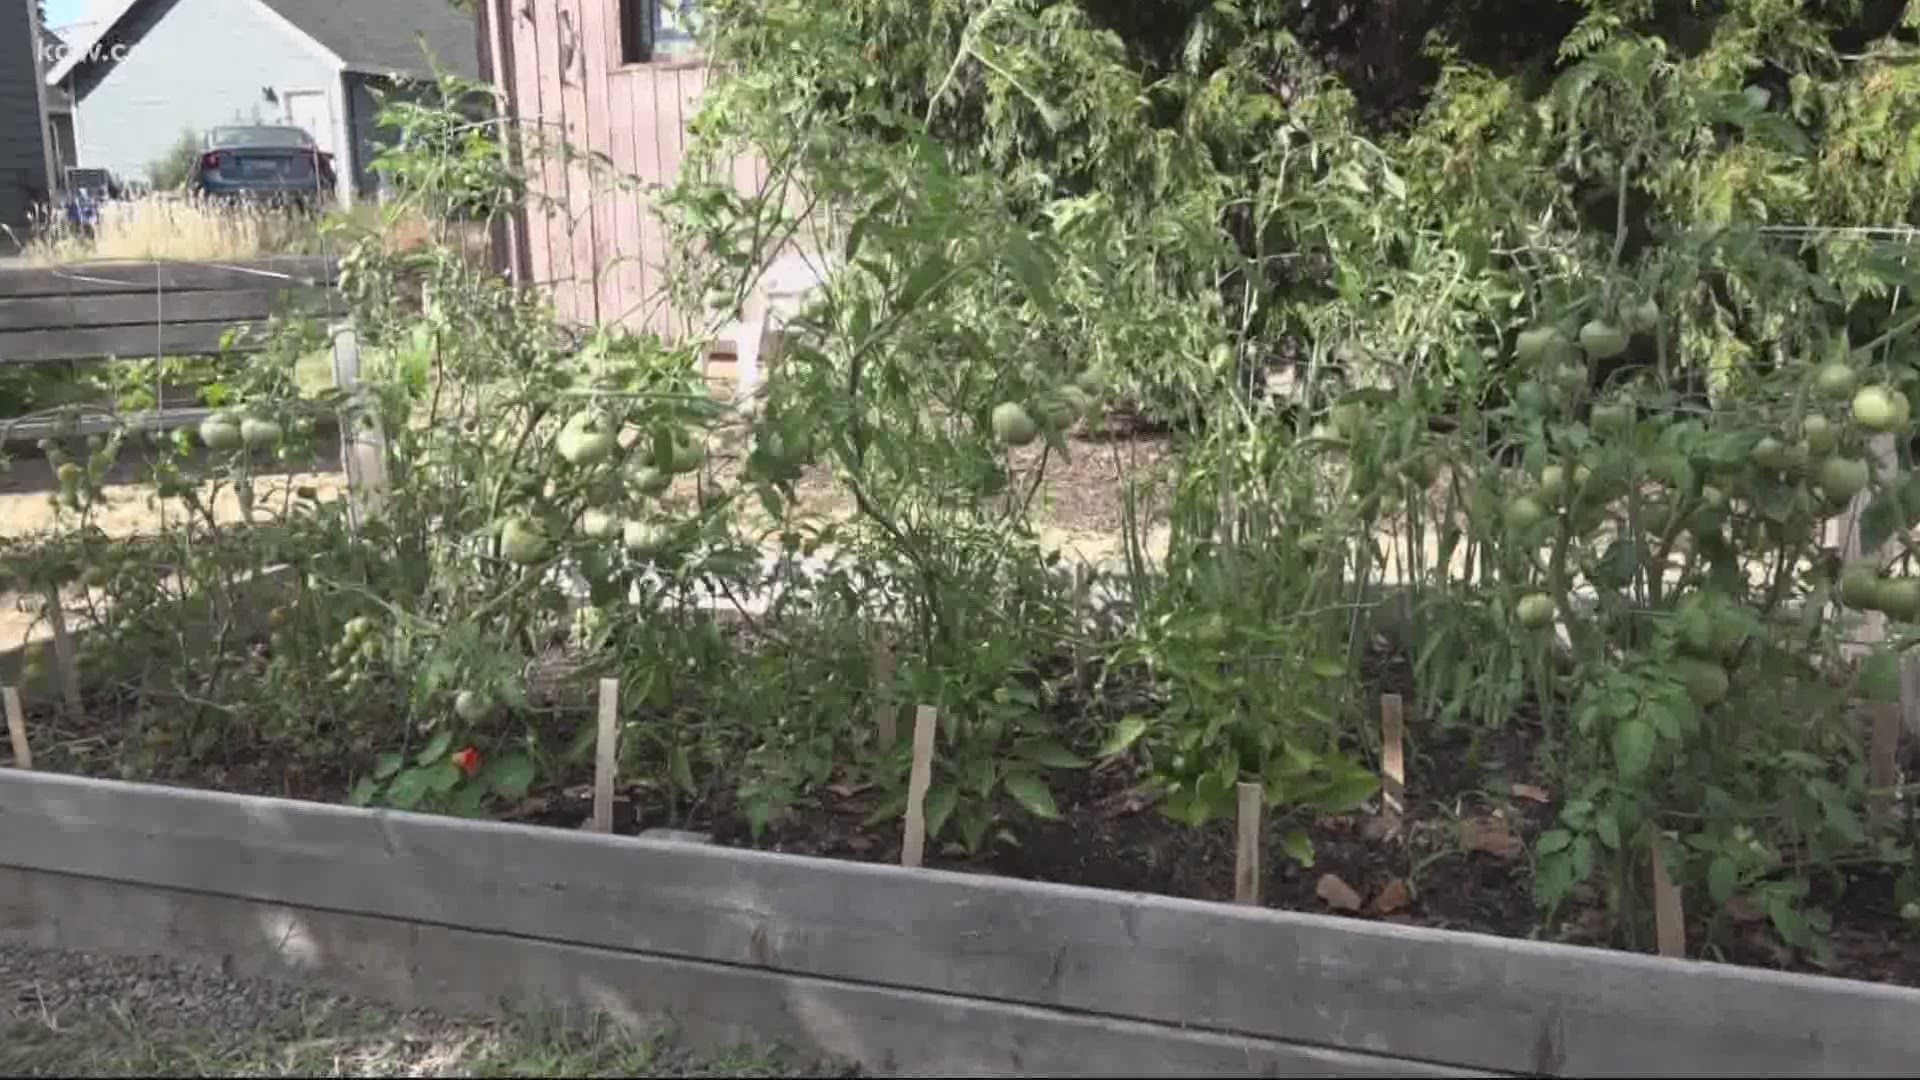 Neighbors tend to a community garden and fill
a food box with donations at Portsmouth Trinity Lutheran Church.